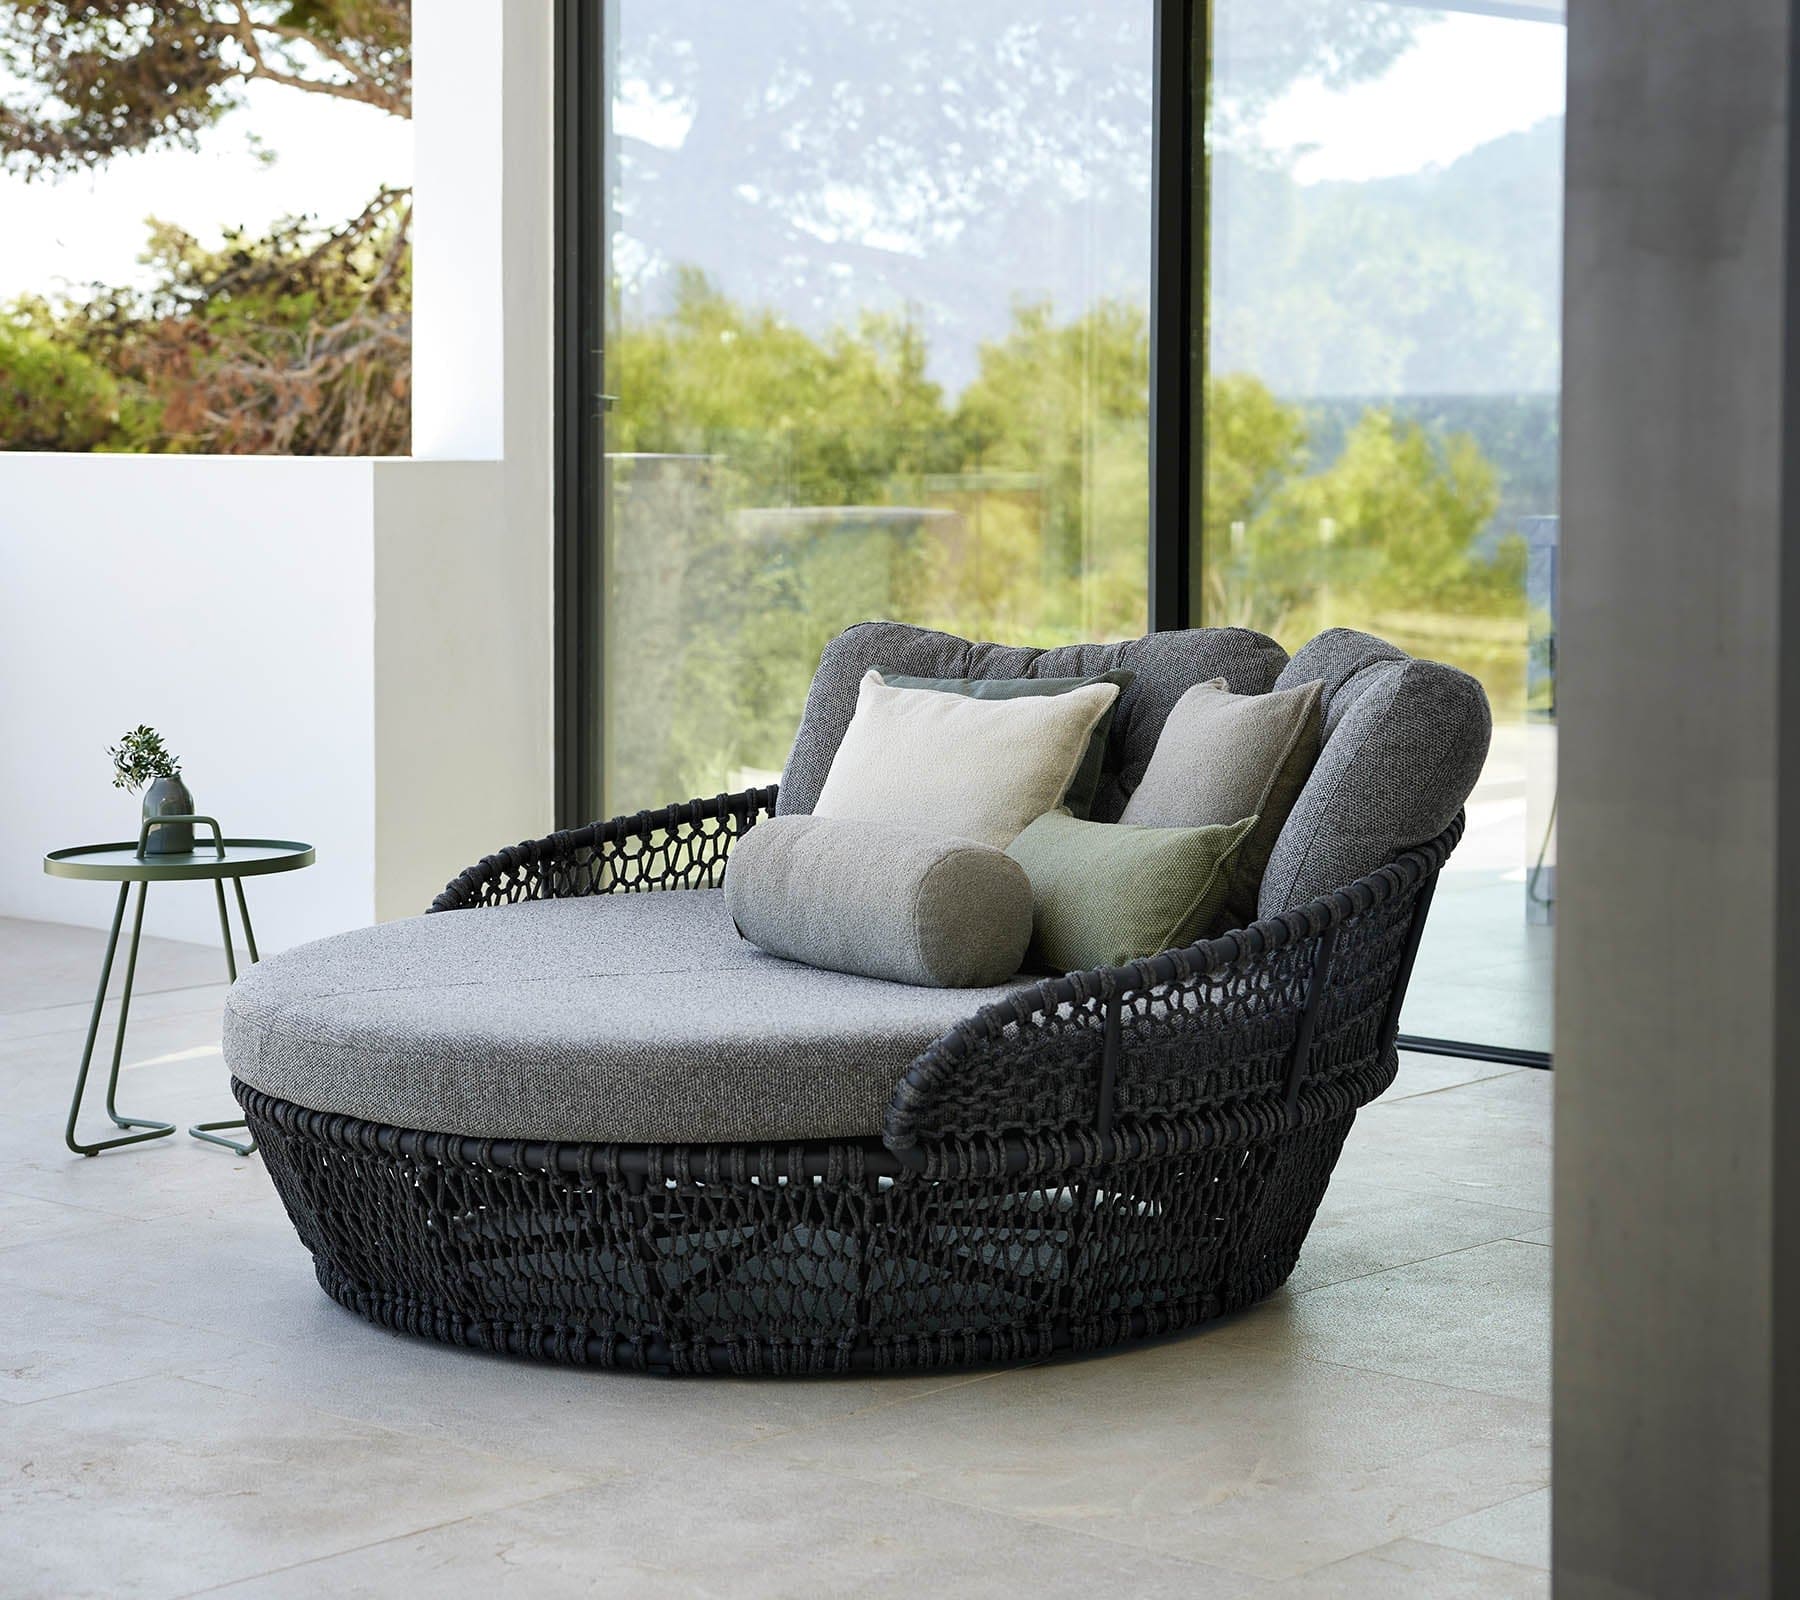 Boxhill's Ocean Large Daybed lifestyle image at patio